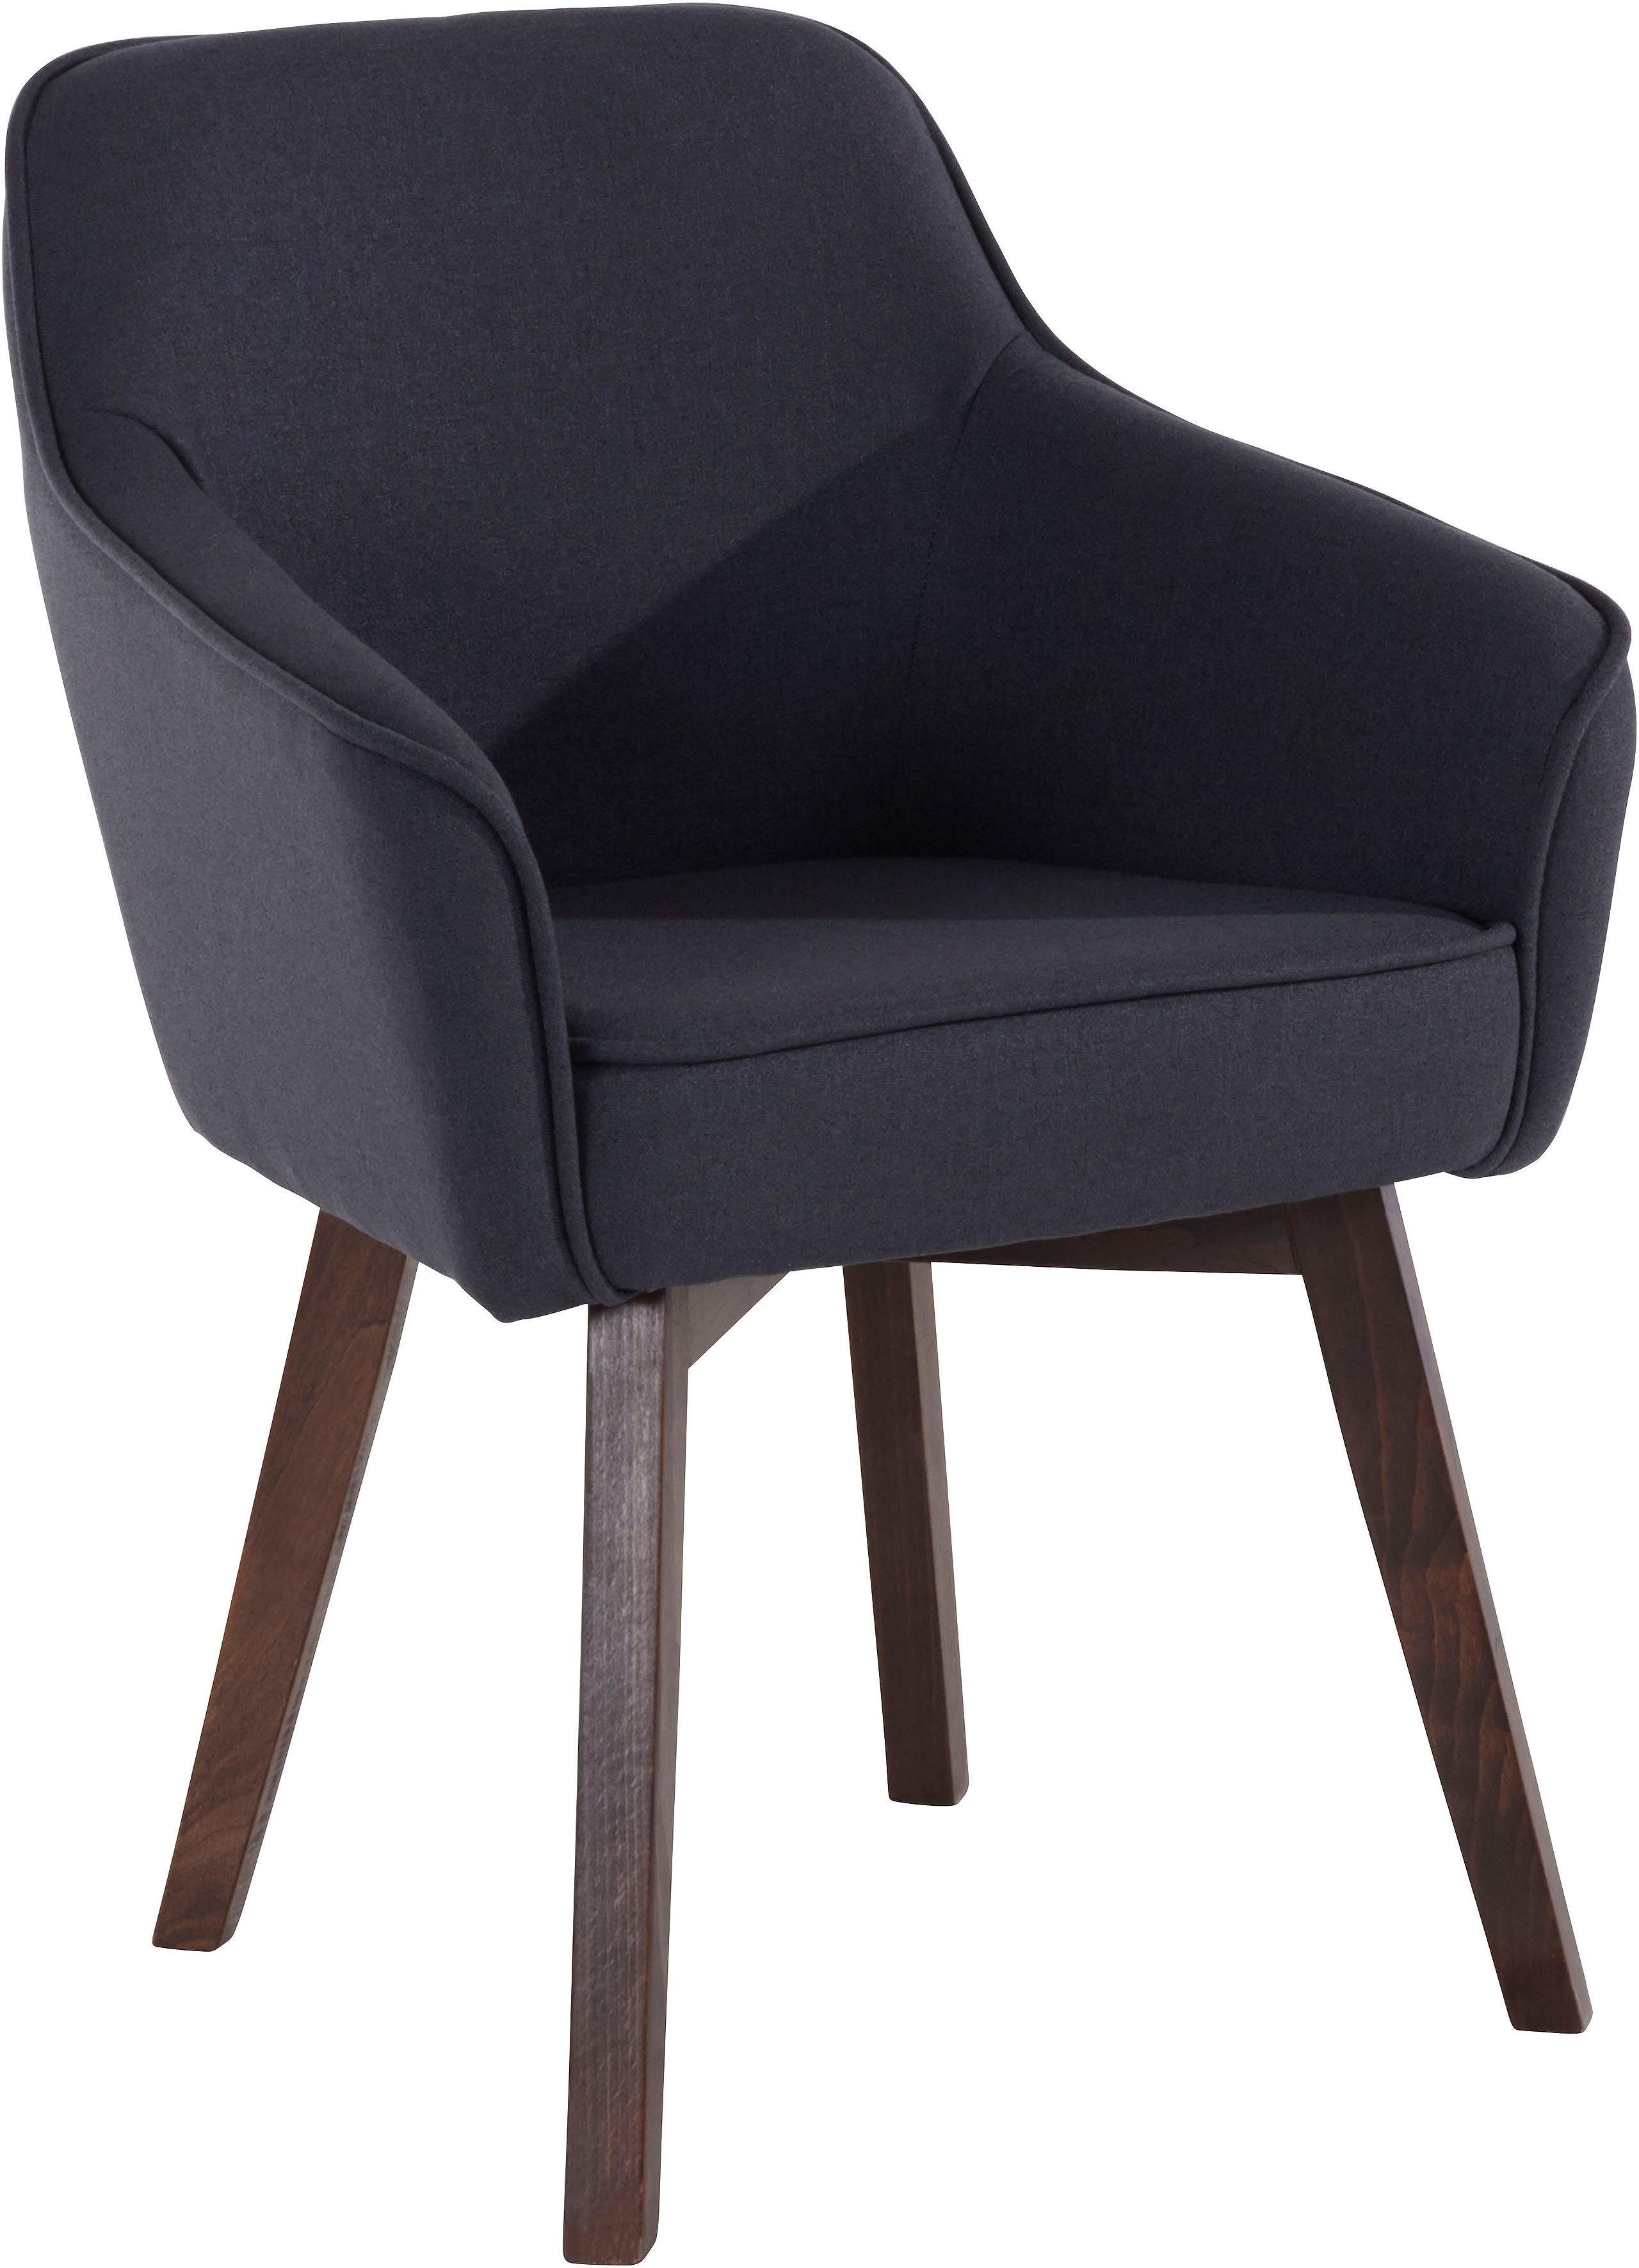 Premium collection by Home affaire Fauteuil Mark